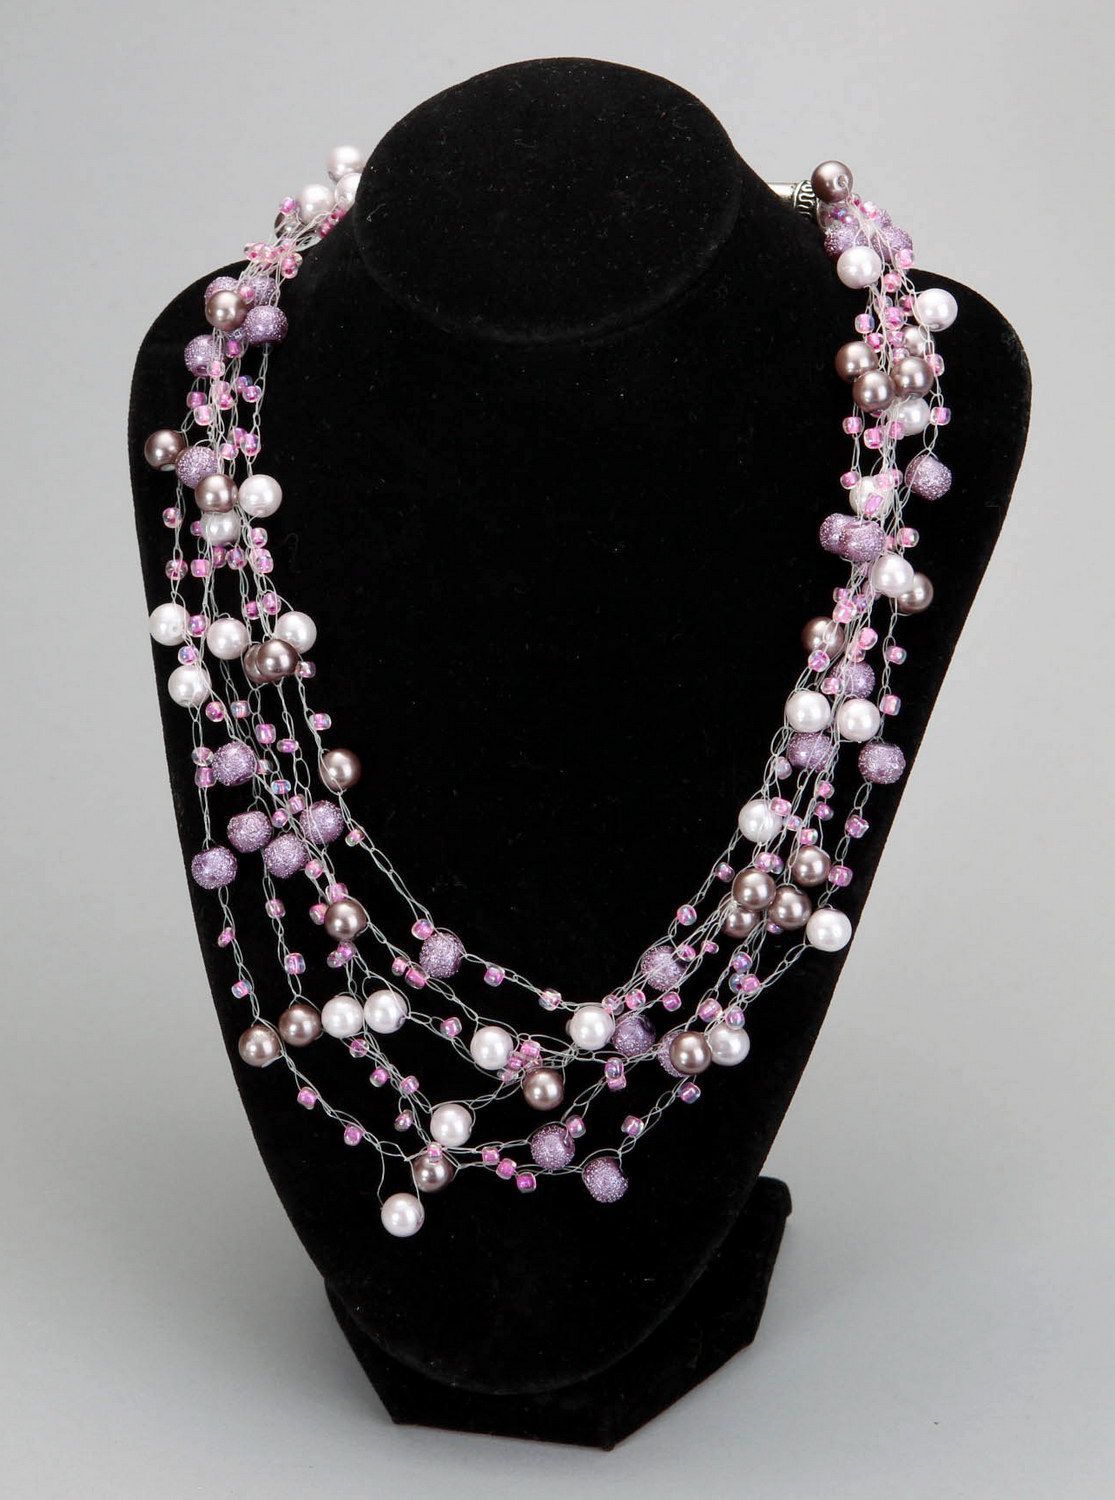 Necklace made of ceramic pearls photo 4